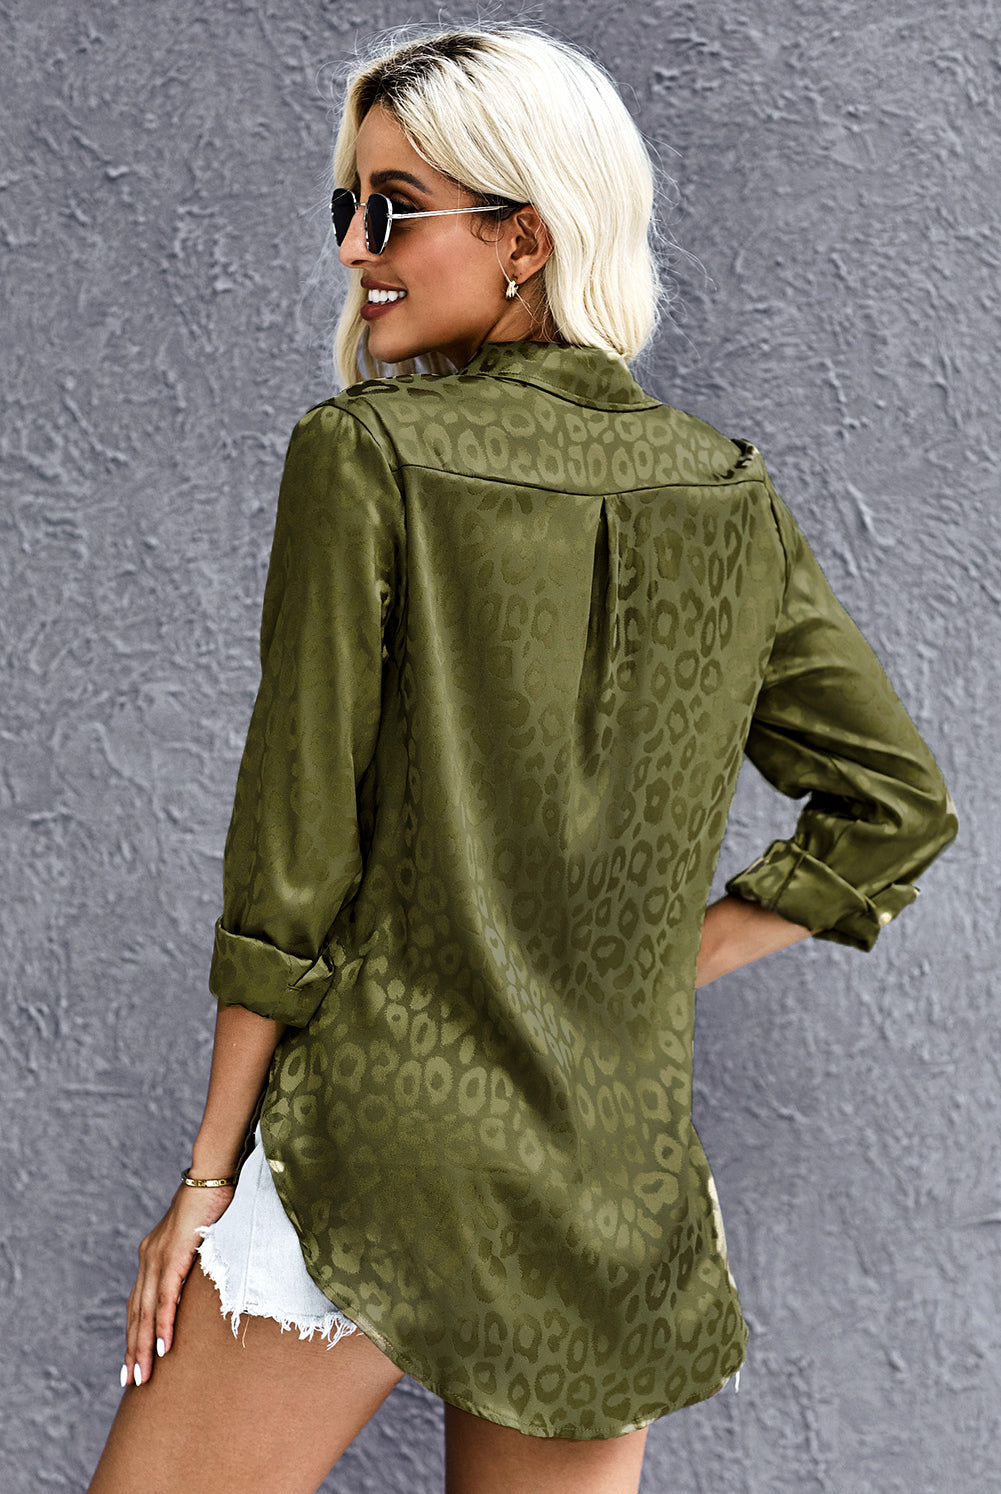 Dim Gray Don't Stop Be-leafing Leopard Slit High-Low Shirt Shirts & Tops